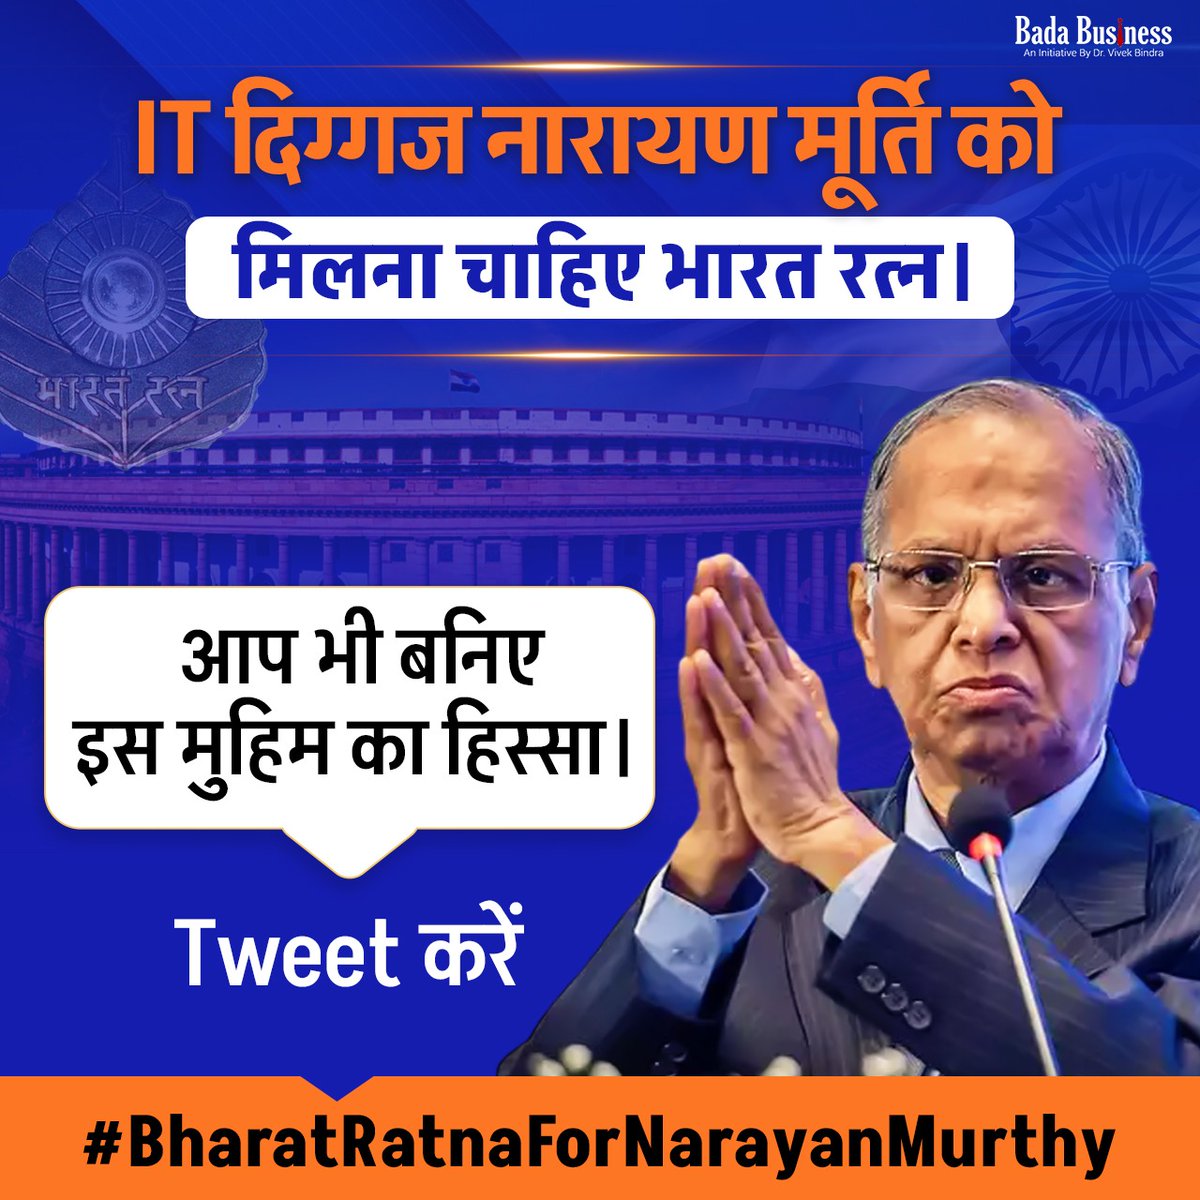 Narayana Murthy's vision and values have not only built Infosys but also uplifted countless lives. It's time his legacy is honored with a Bharat Ratna. Join the movement with Dr. Vivek Bindra. #BharatRatnaForNarayanaMurthy